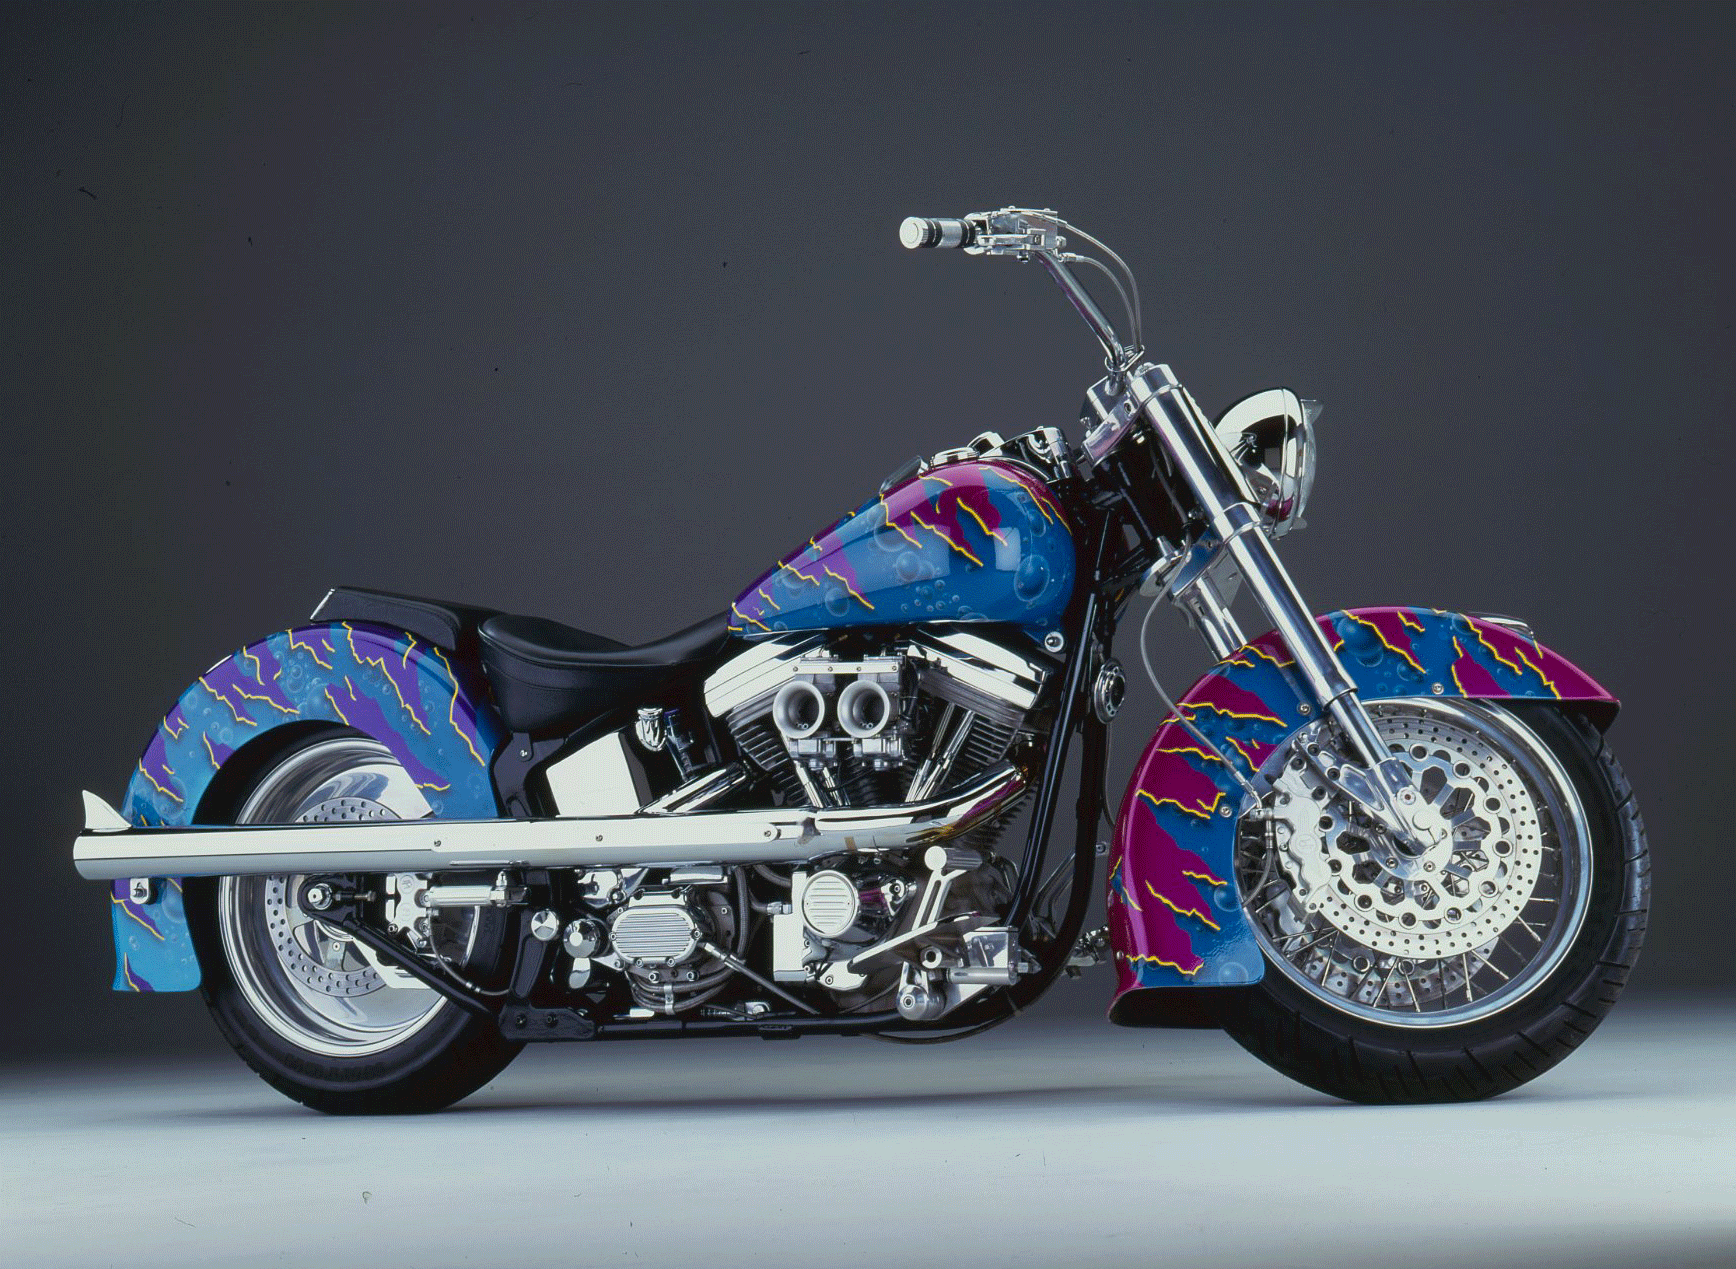 Builder Denny Berg referred to his custom’s appearance as “kind-of-a-surfer-punk-on-acid-look..